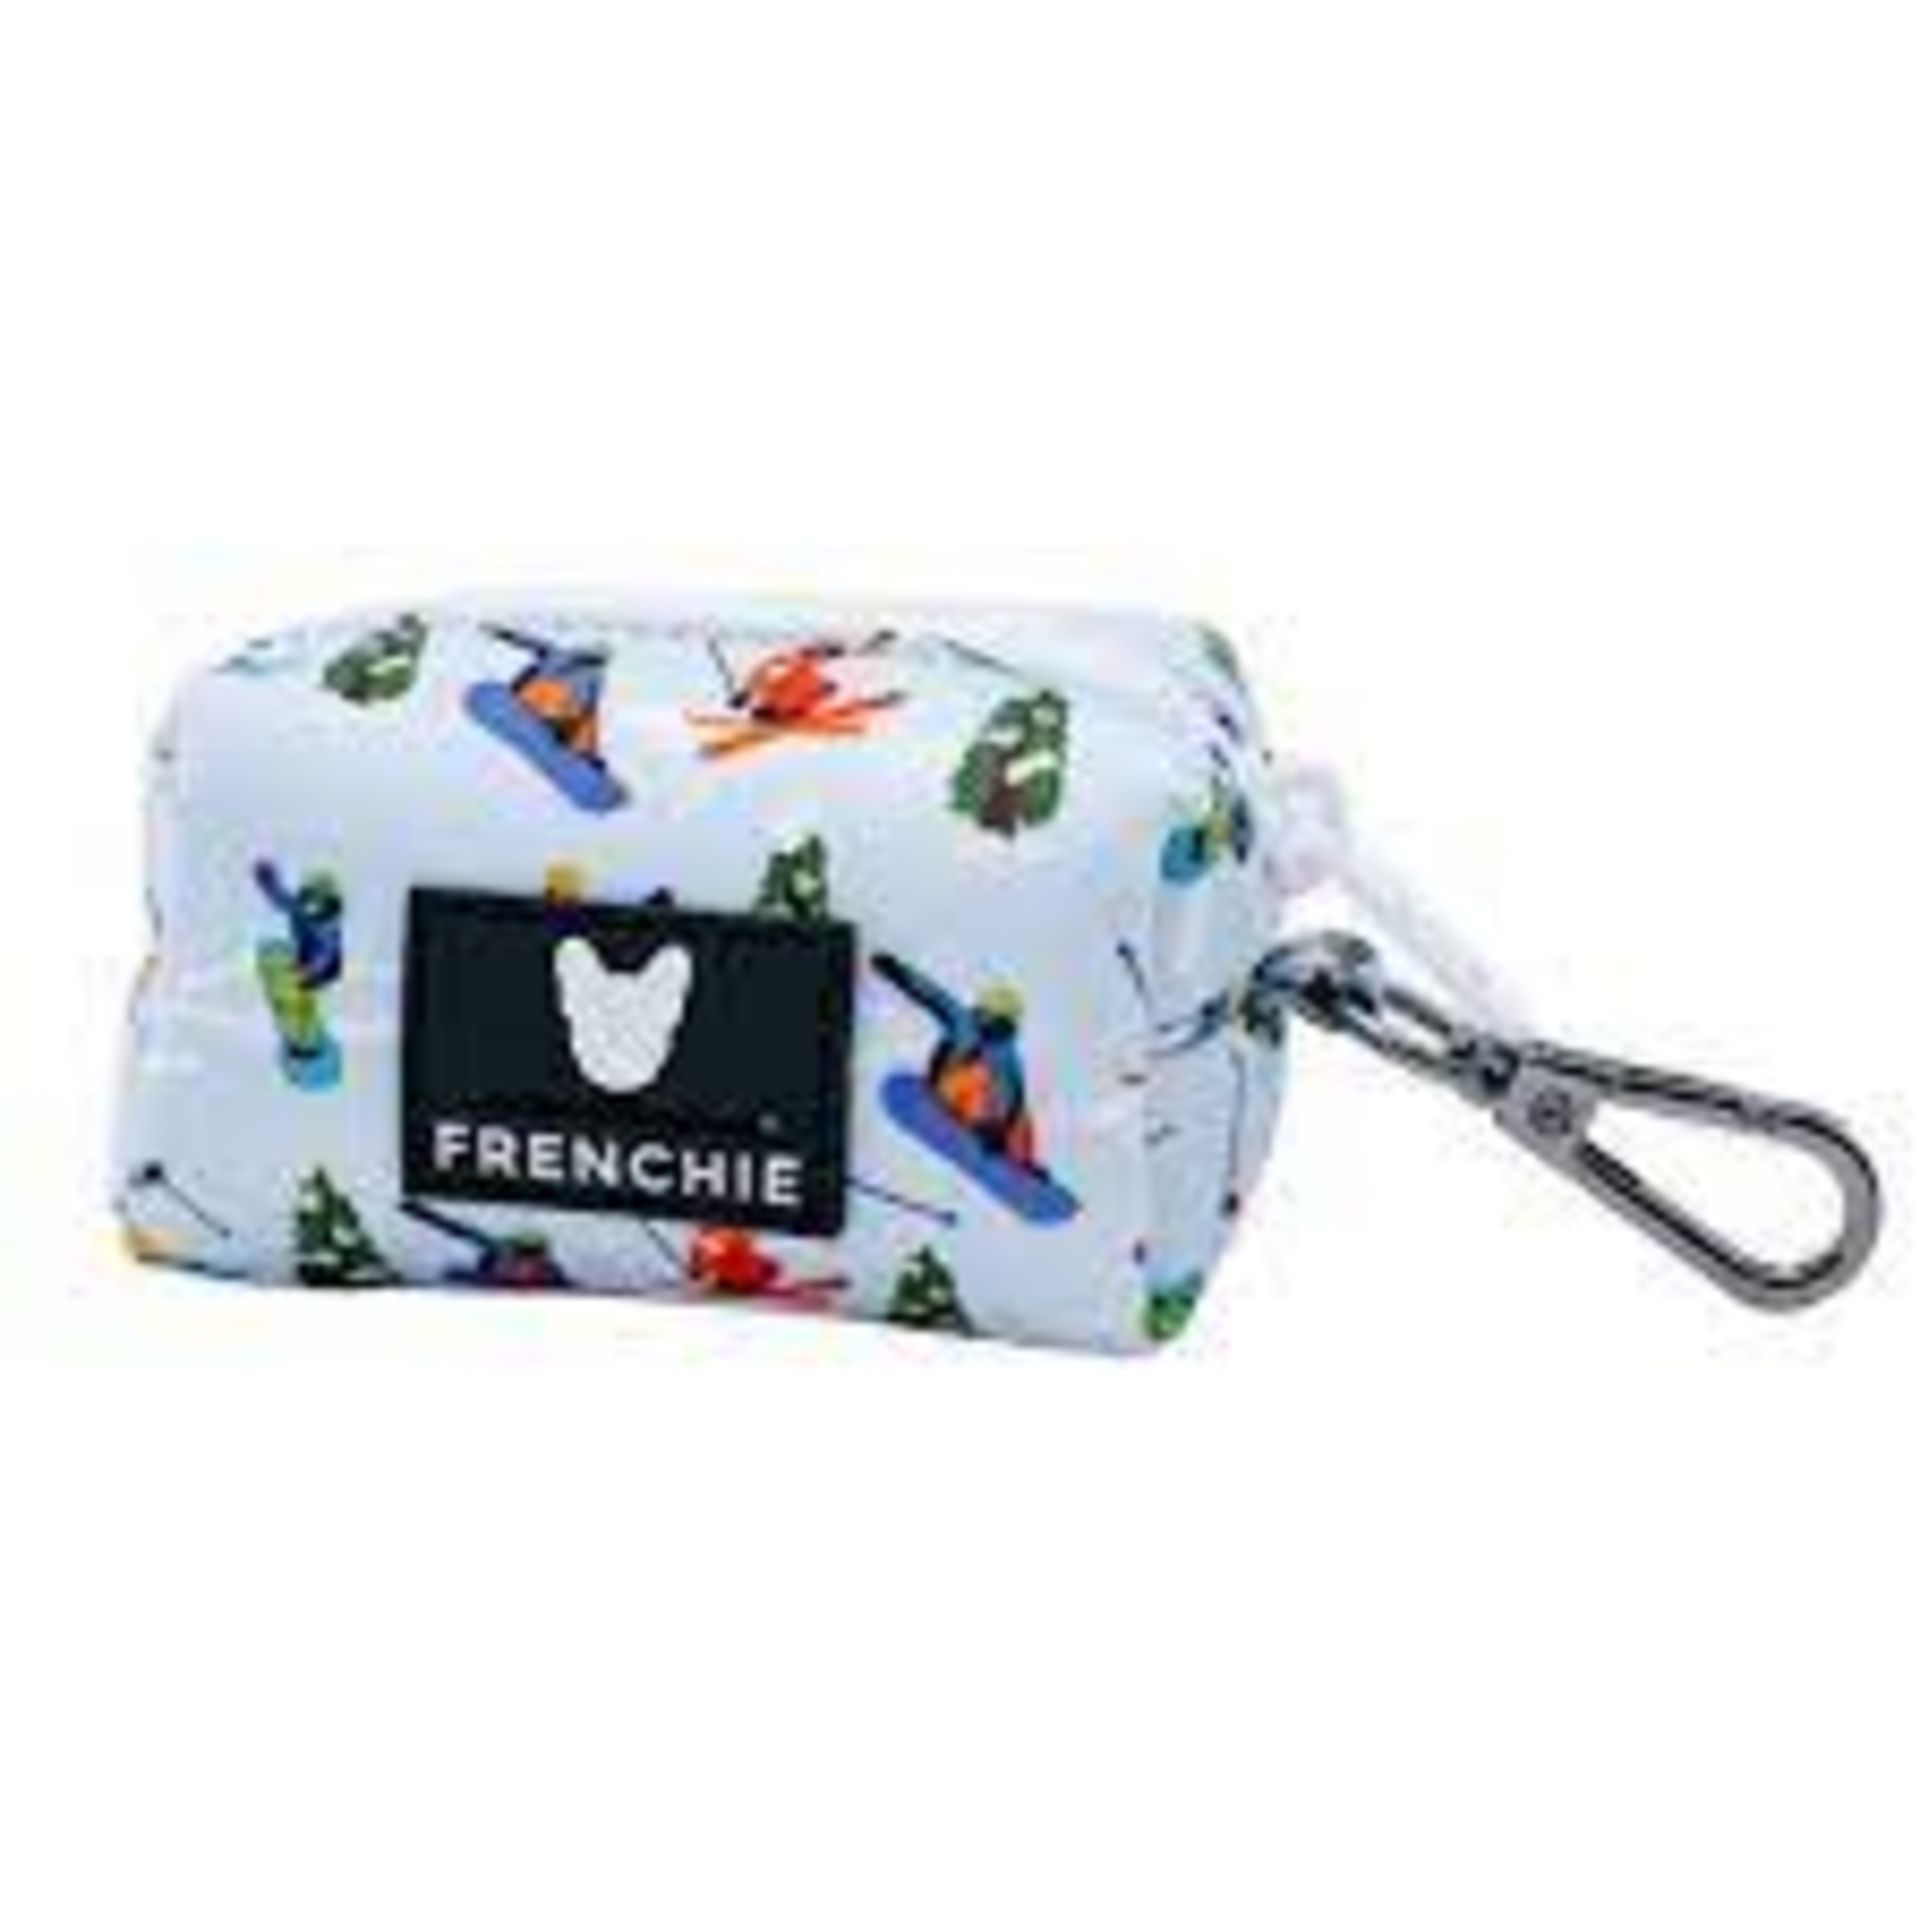 Bulk Trade Lot 500 X New .Packaged Frenchie The Bulldog Luxury Branded Dog Products. May include - Image 27 of 50